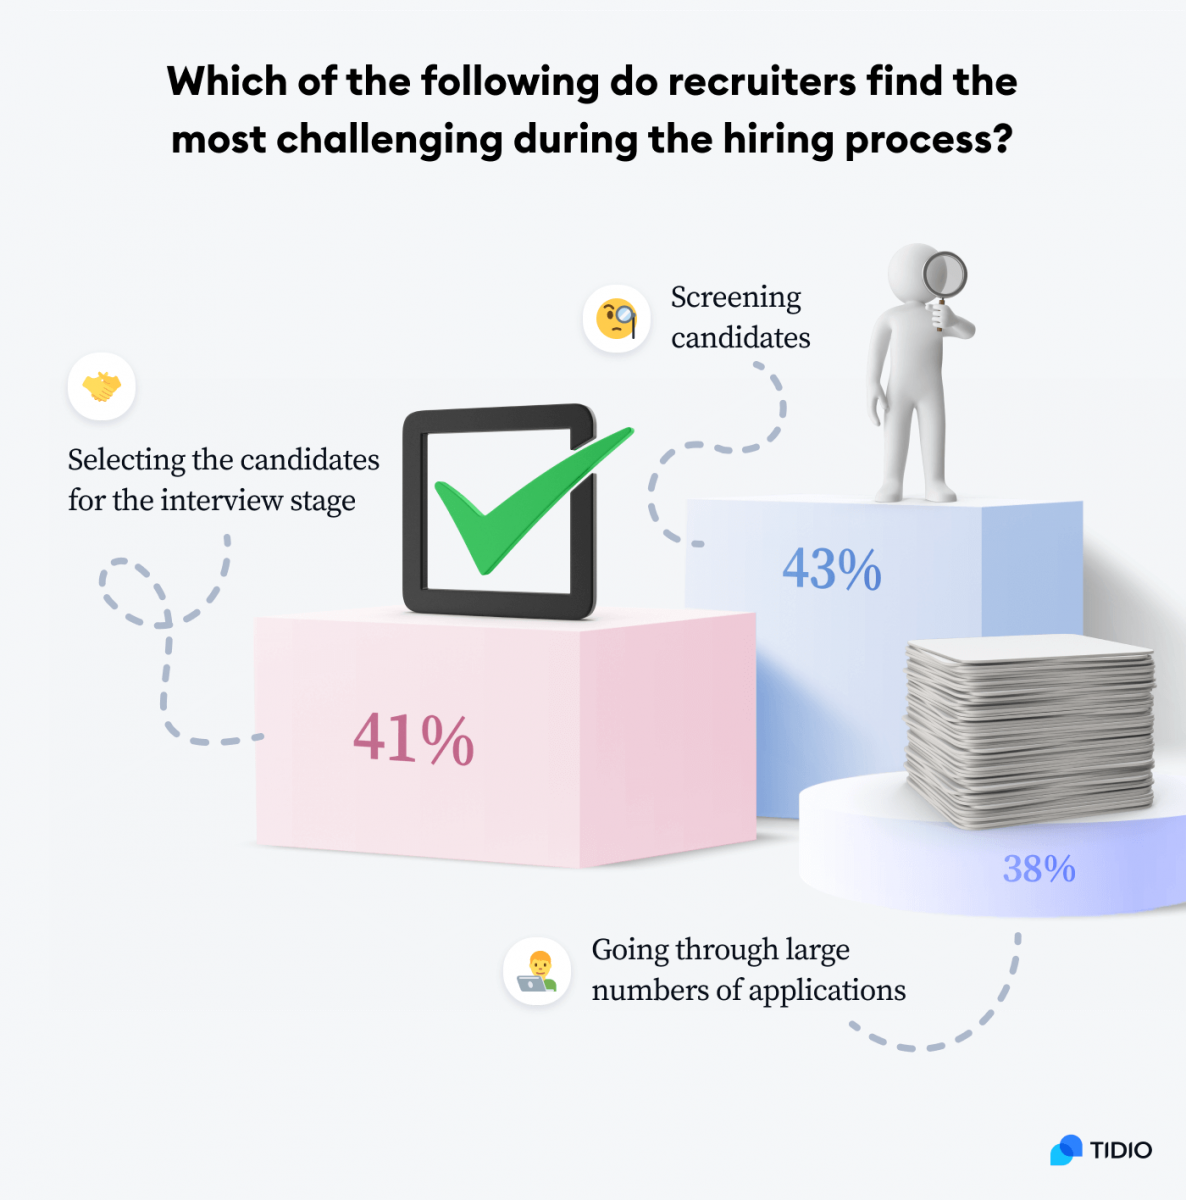 Infographic titled: Which of the following do recruiters find the most challenging during the hiring process?